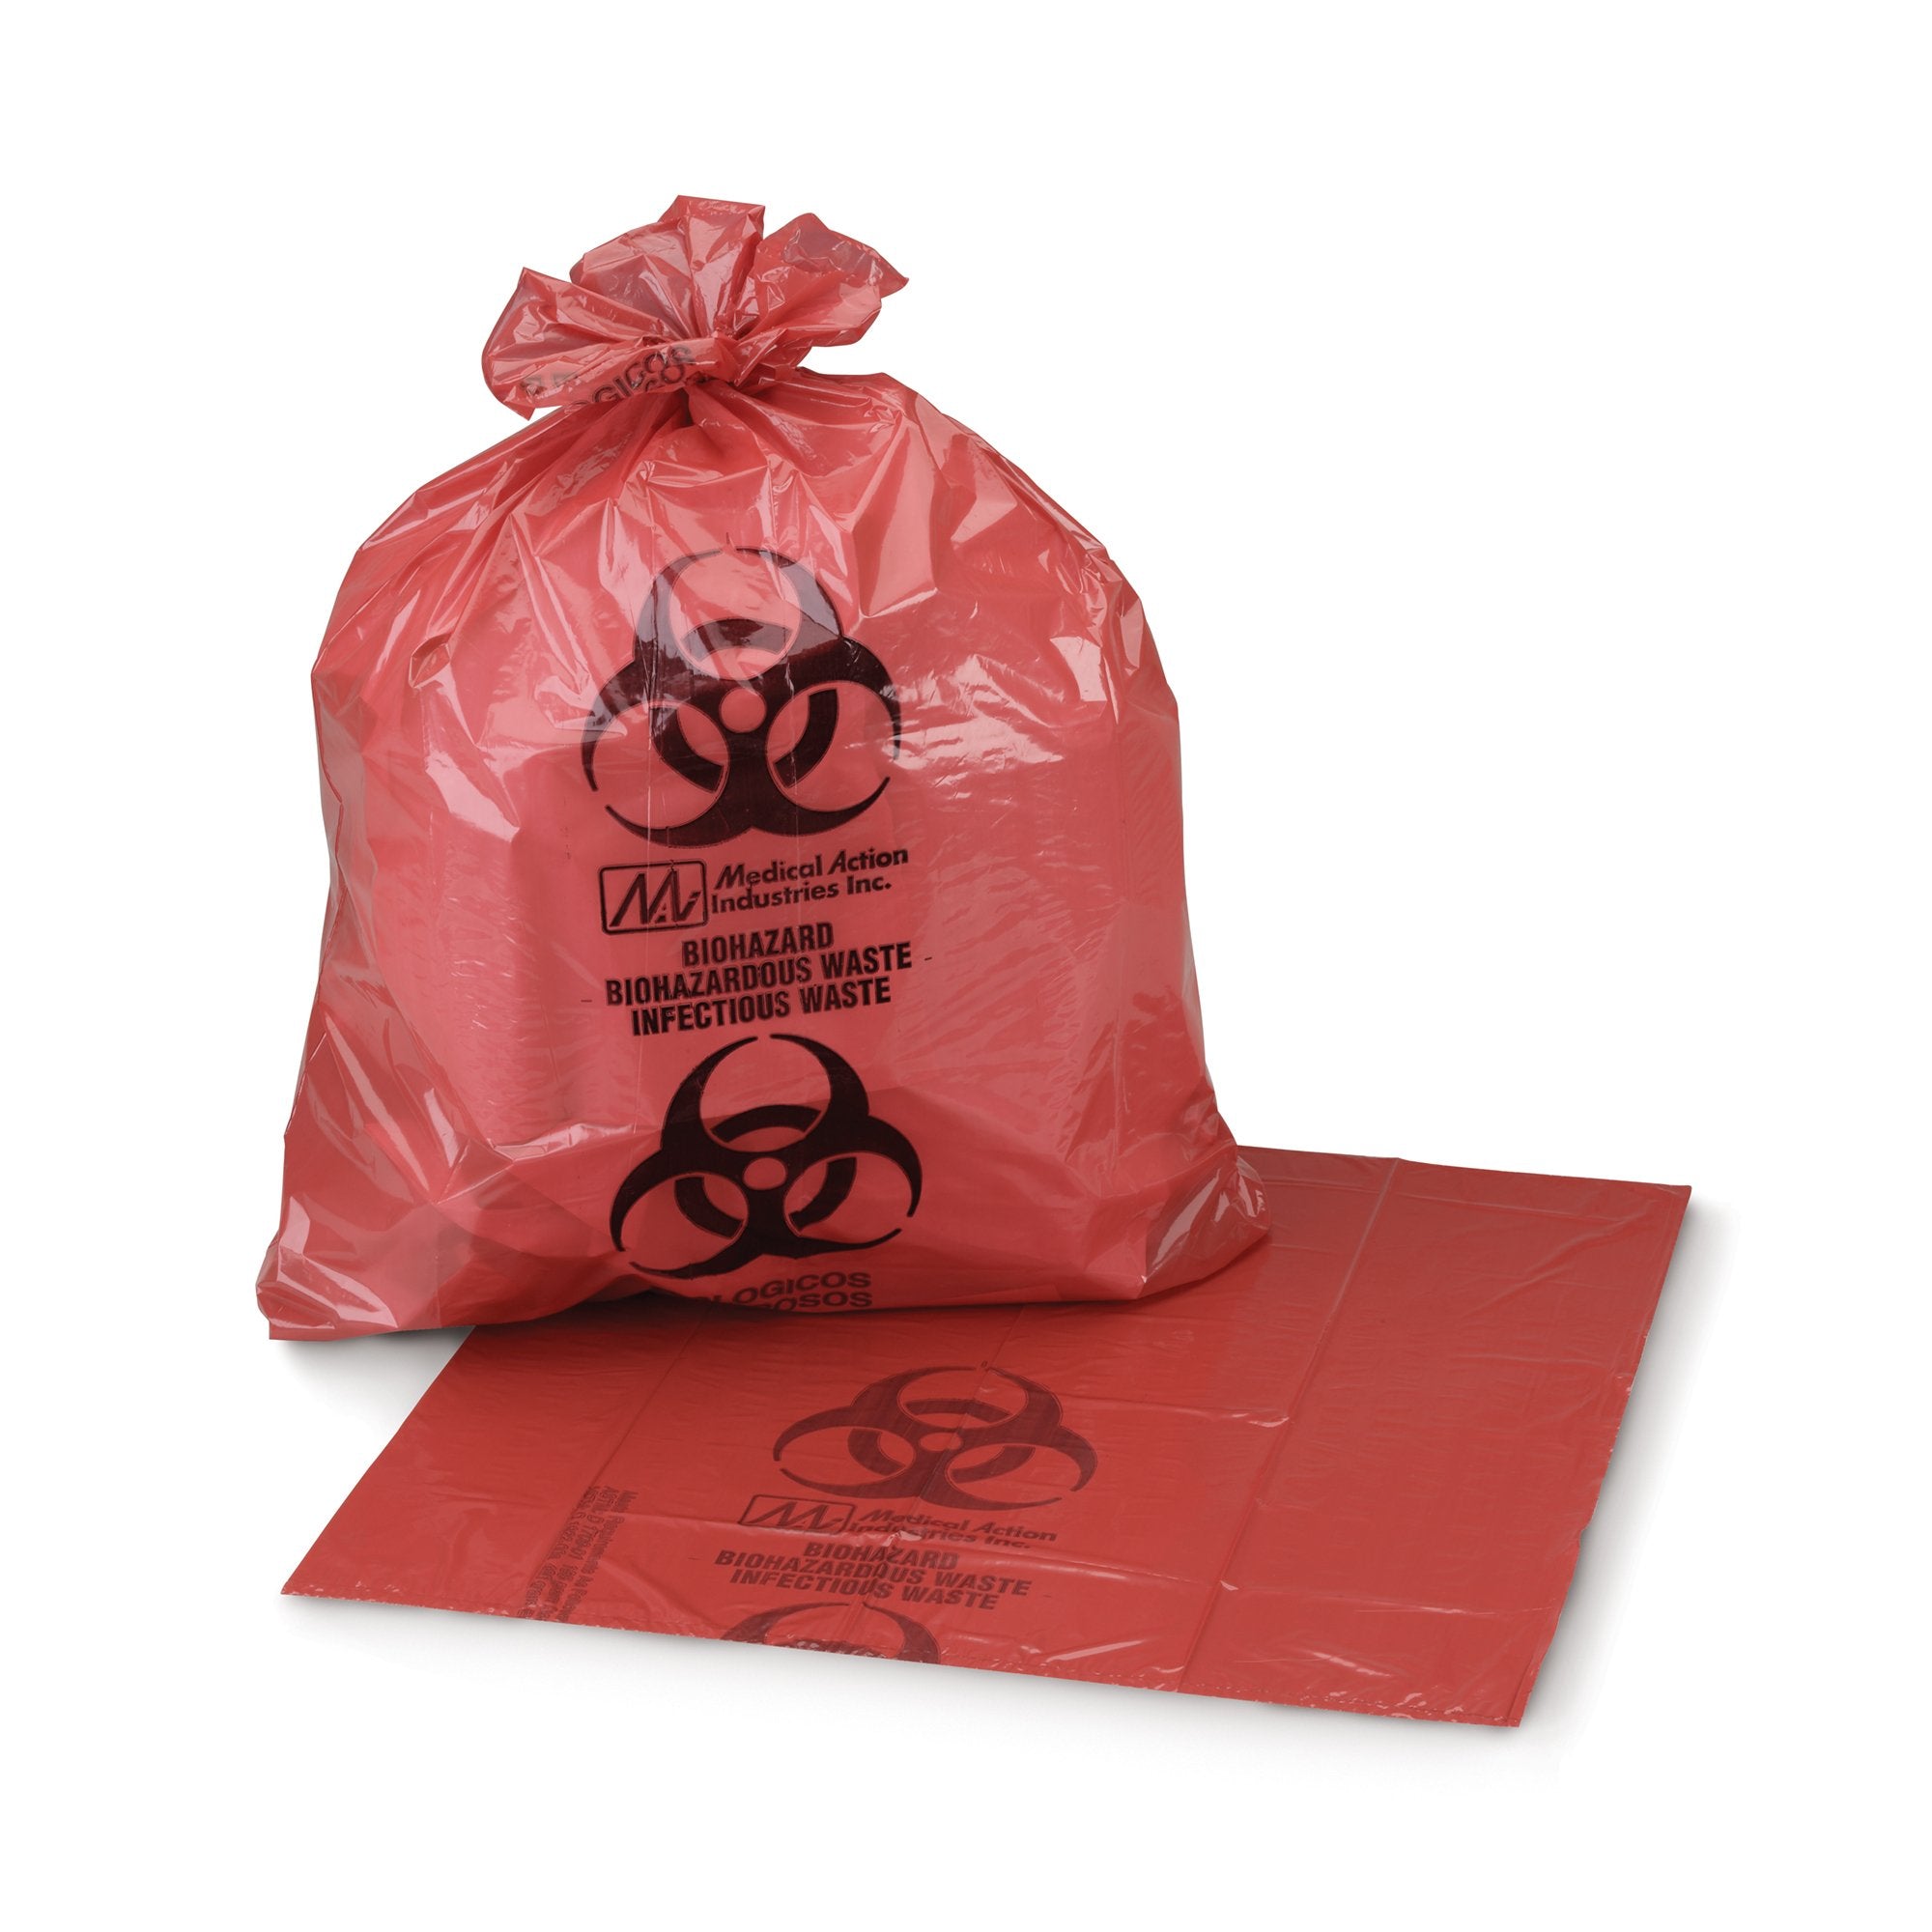 Infectious Waste Bag McKesson 20 to 25 gal. Red Bag 28 X 31 Inch